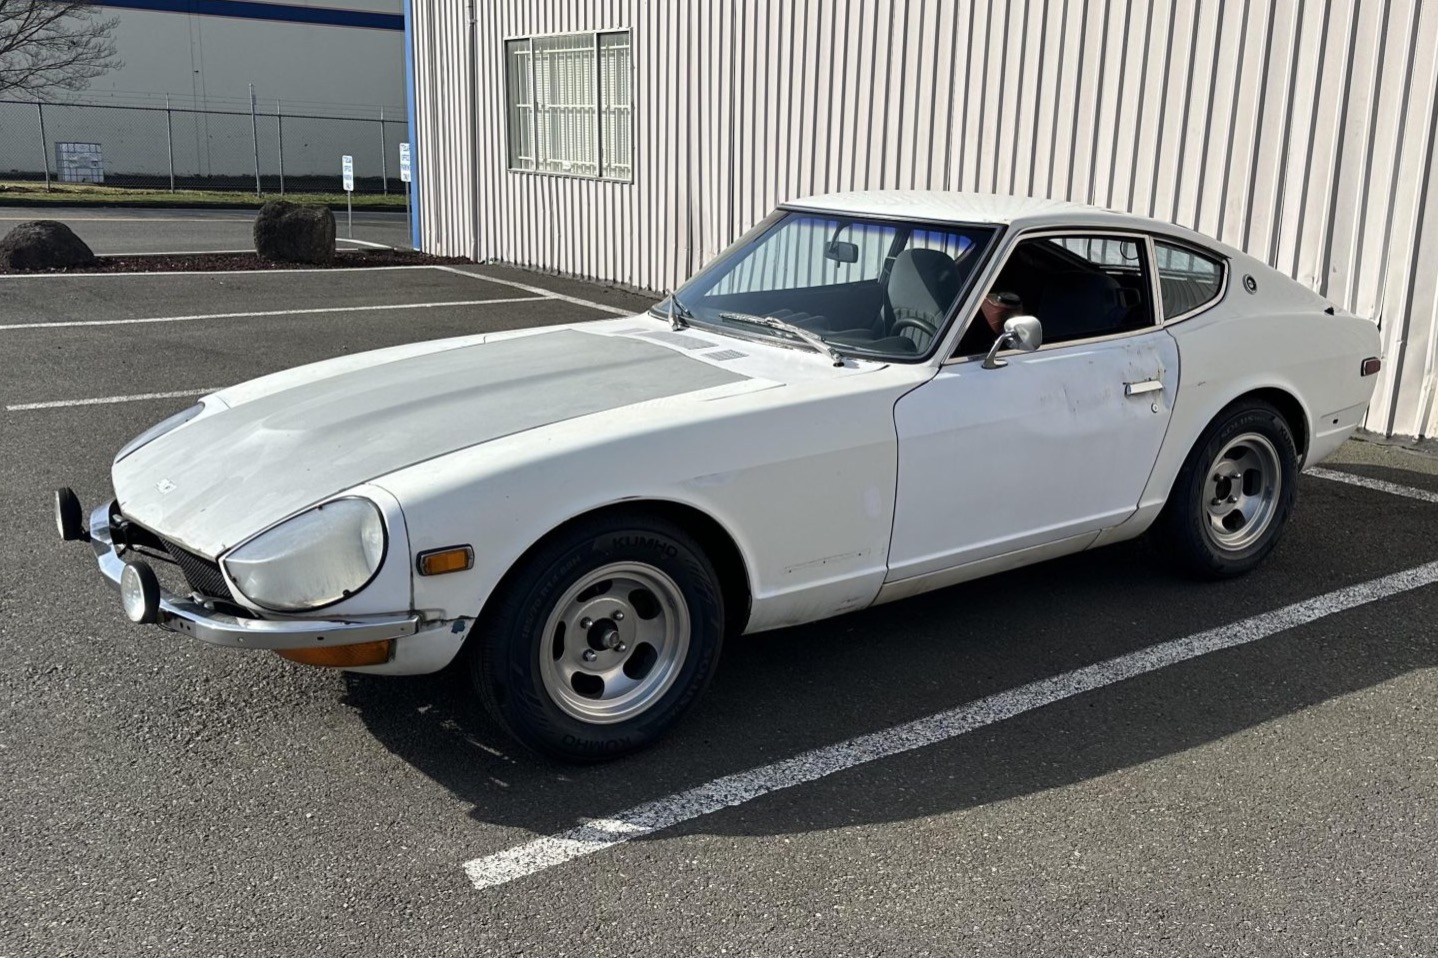 Used 1973 Datsun 240Z 5-Speed Review